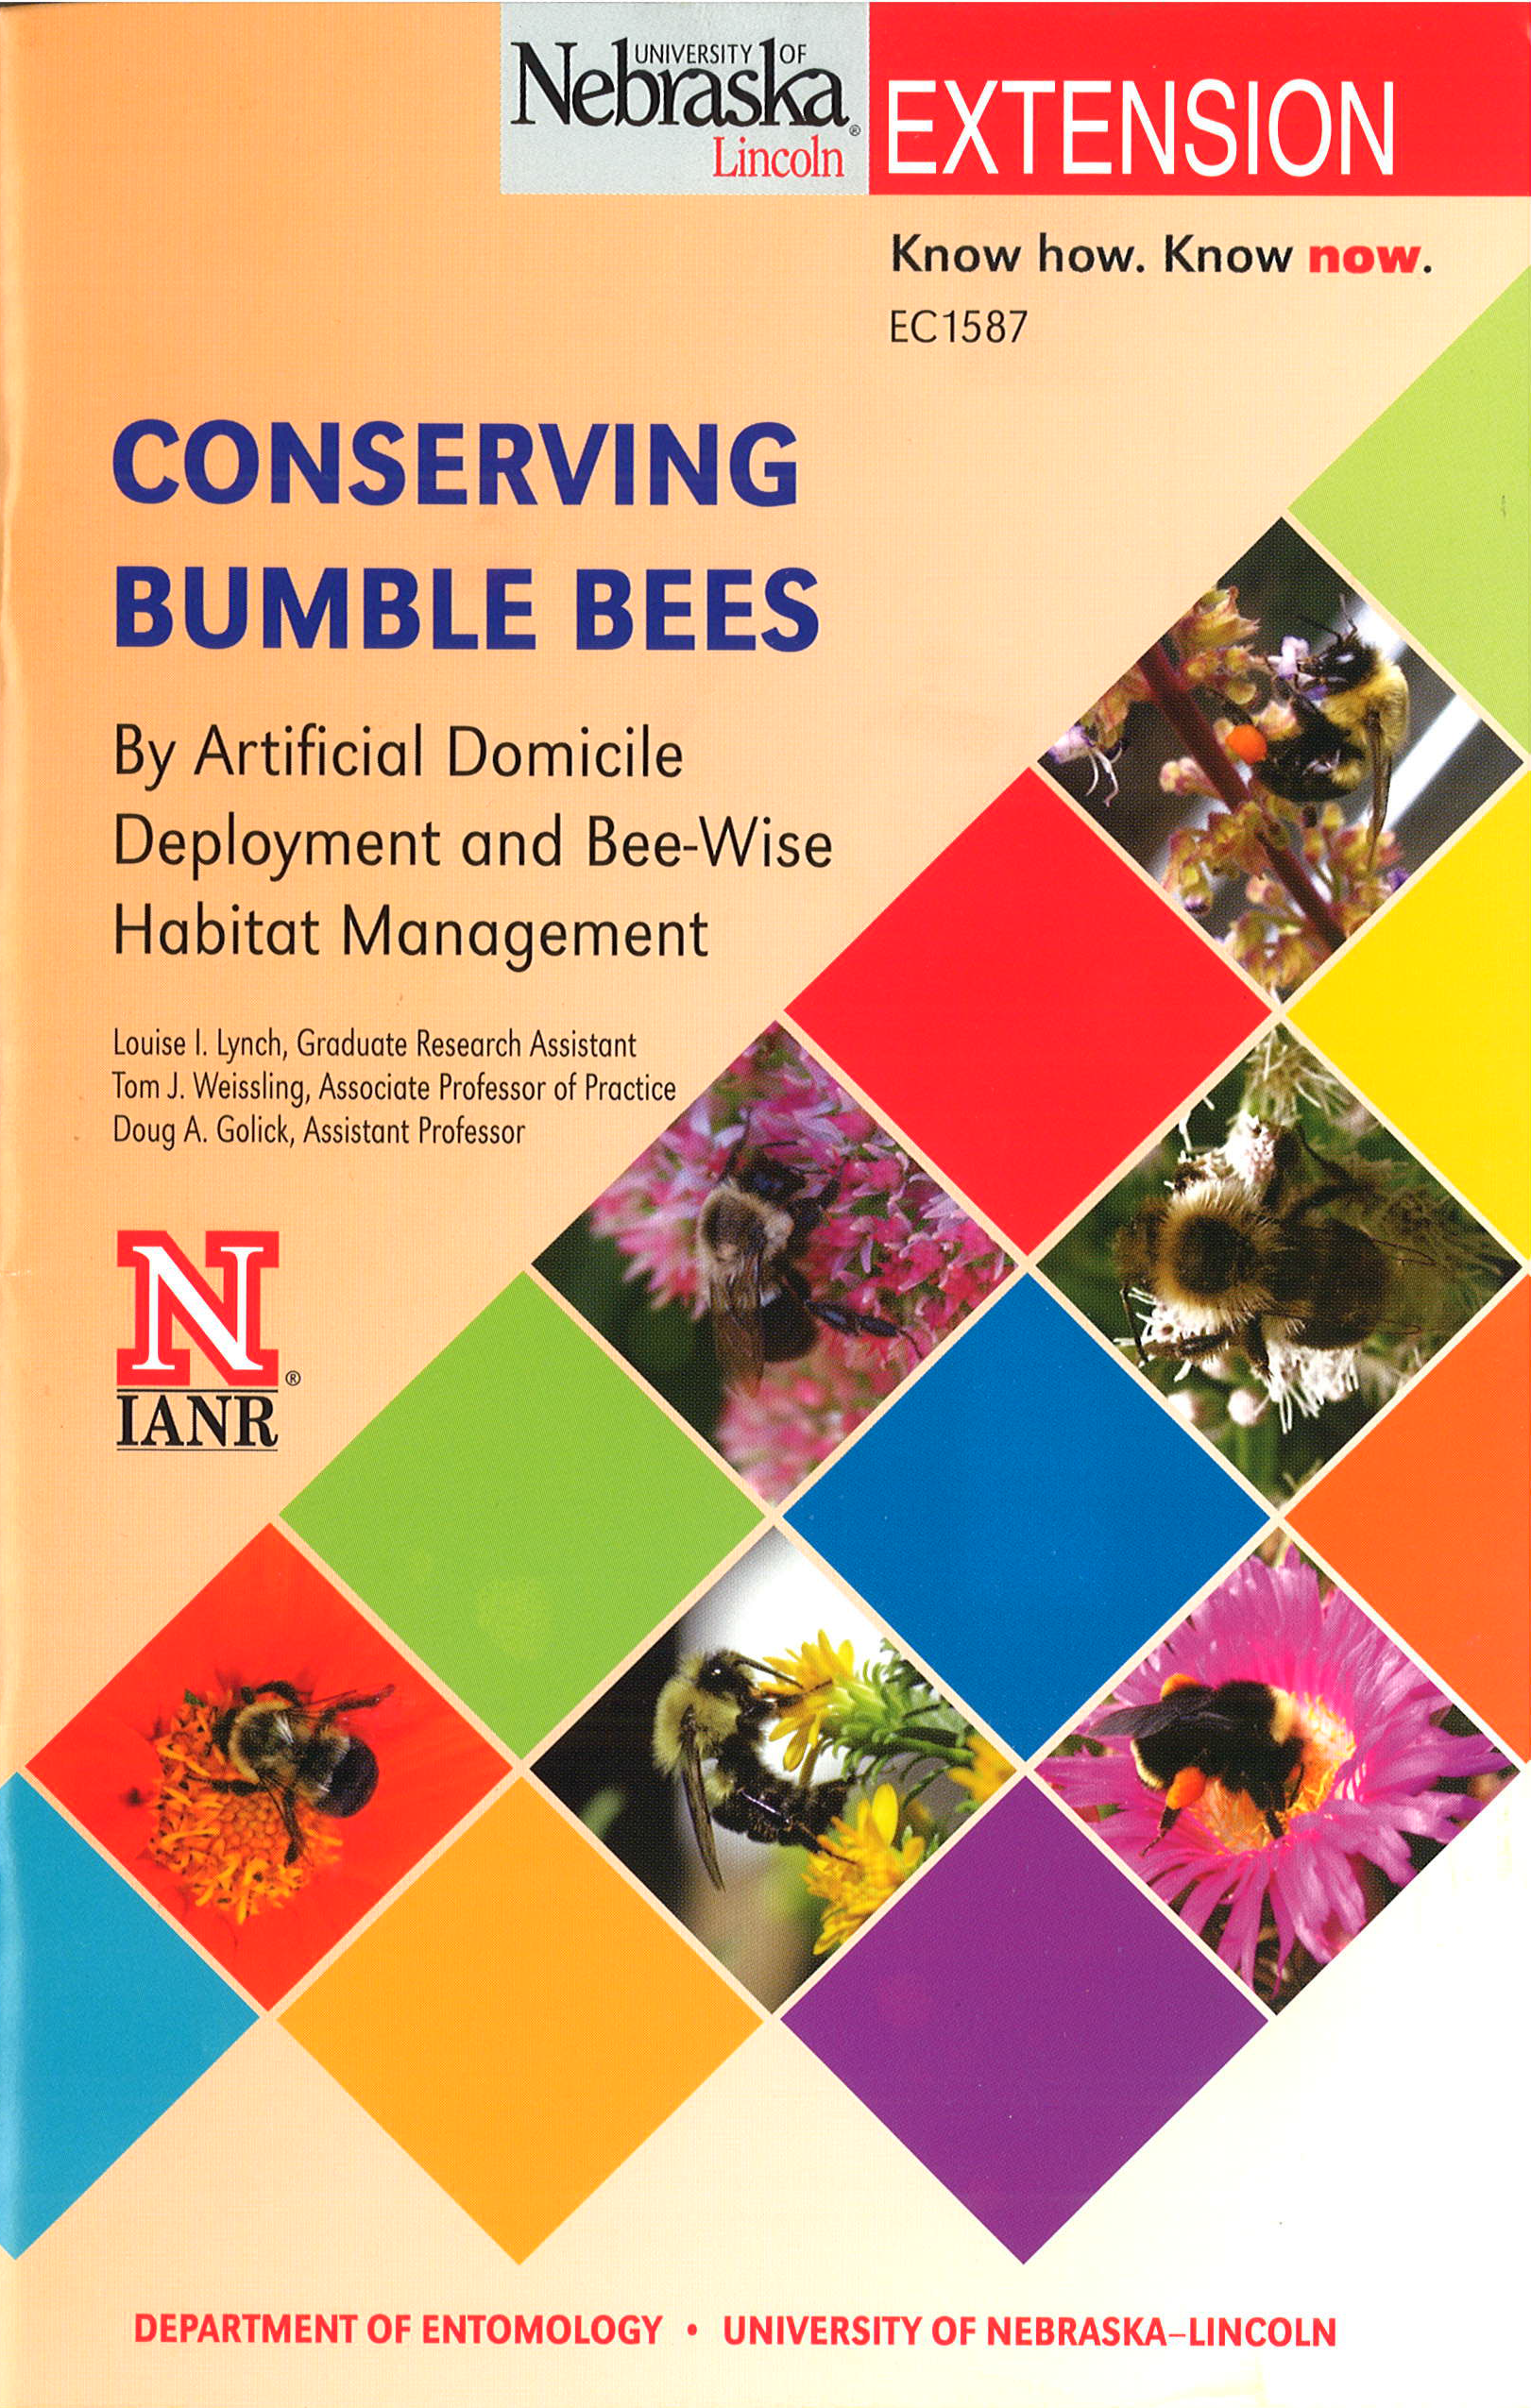 Conserving Bumble Bees